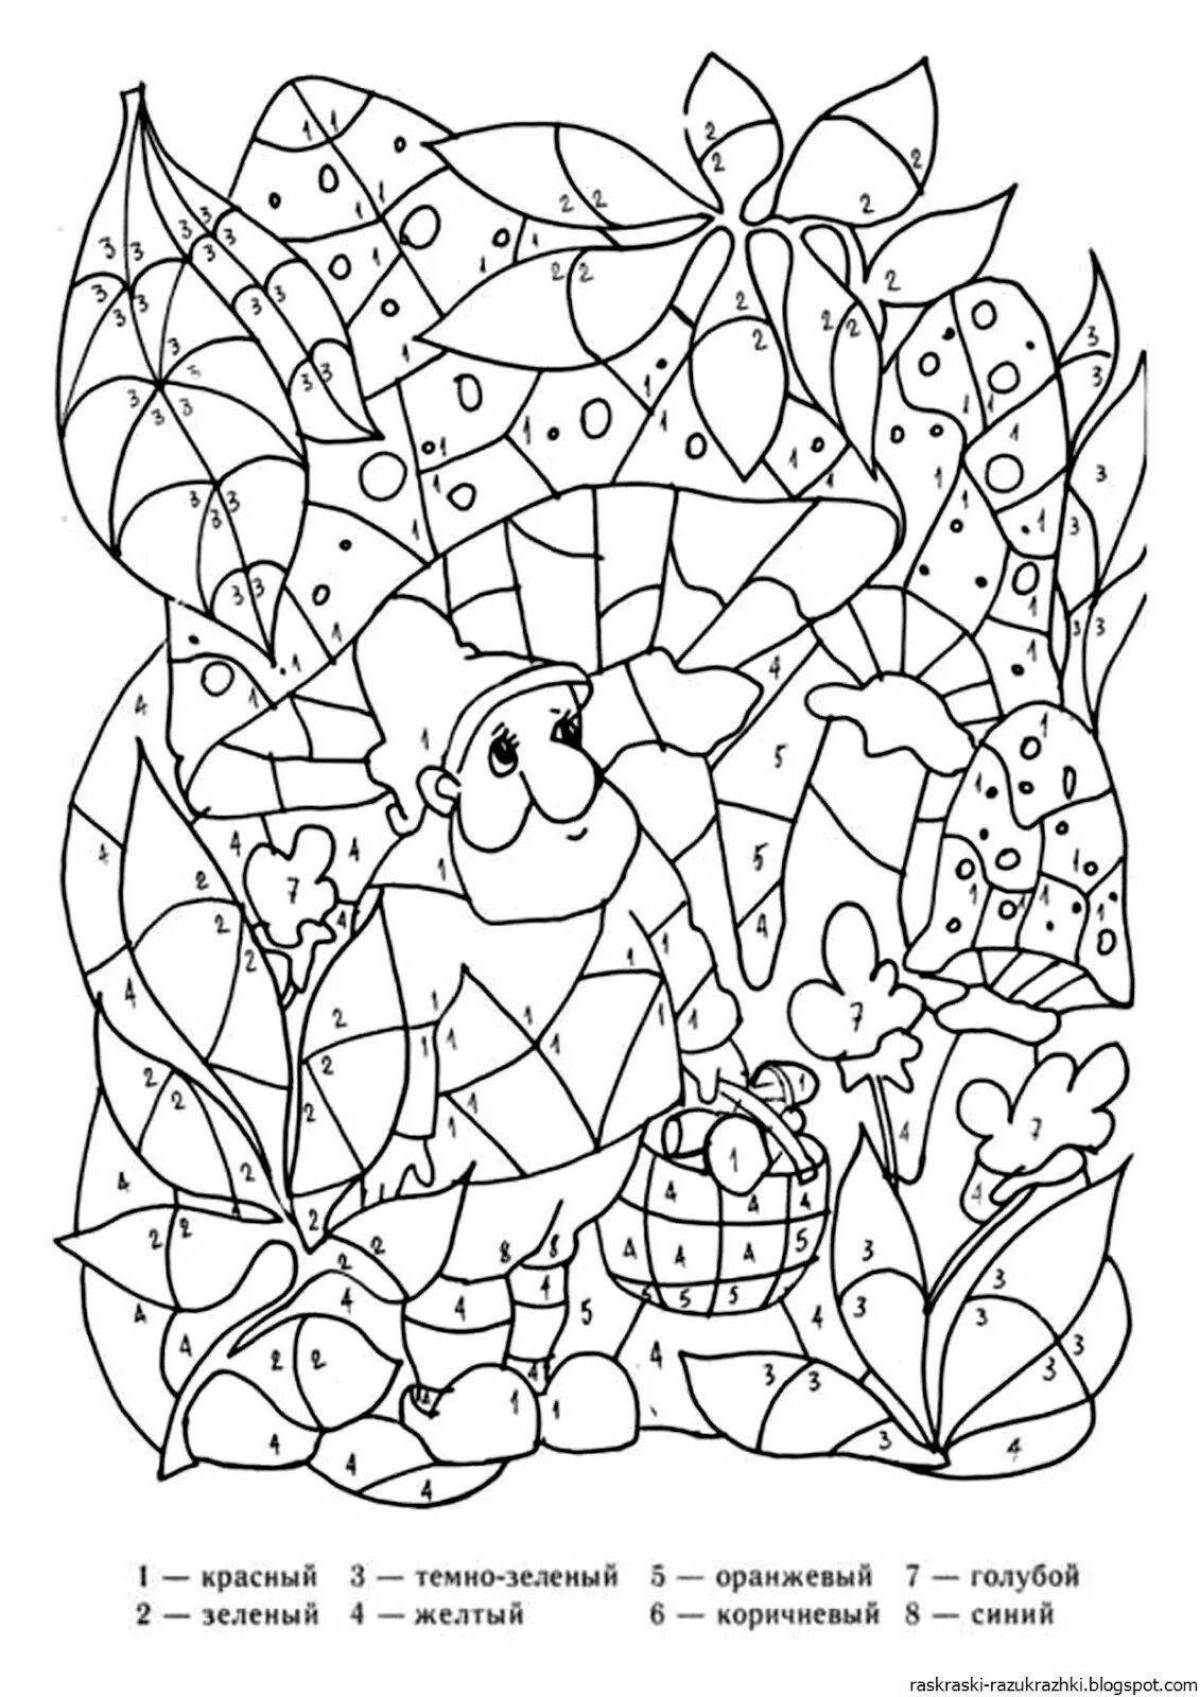 Fun coloring by numbers for girls 6-7 years old